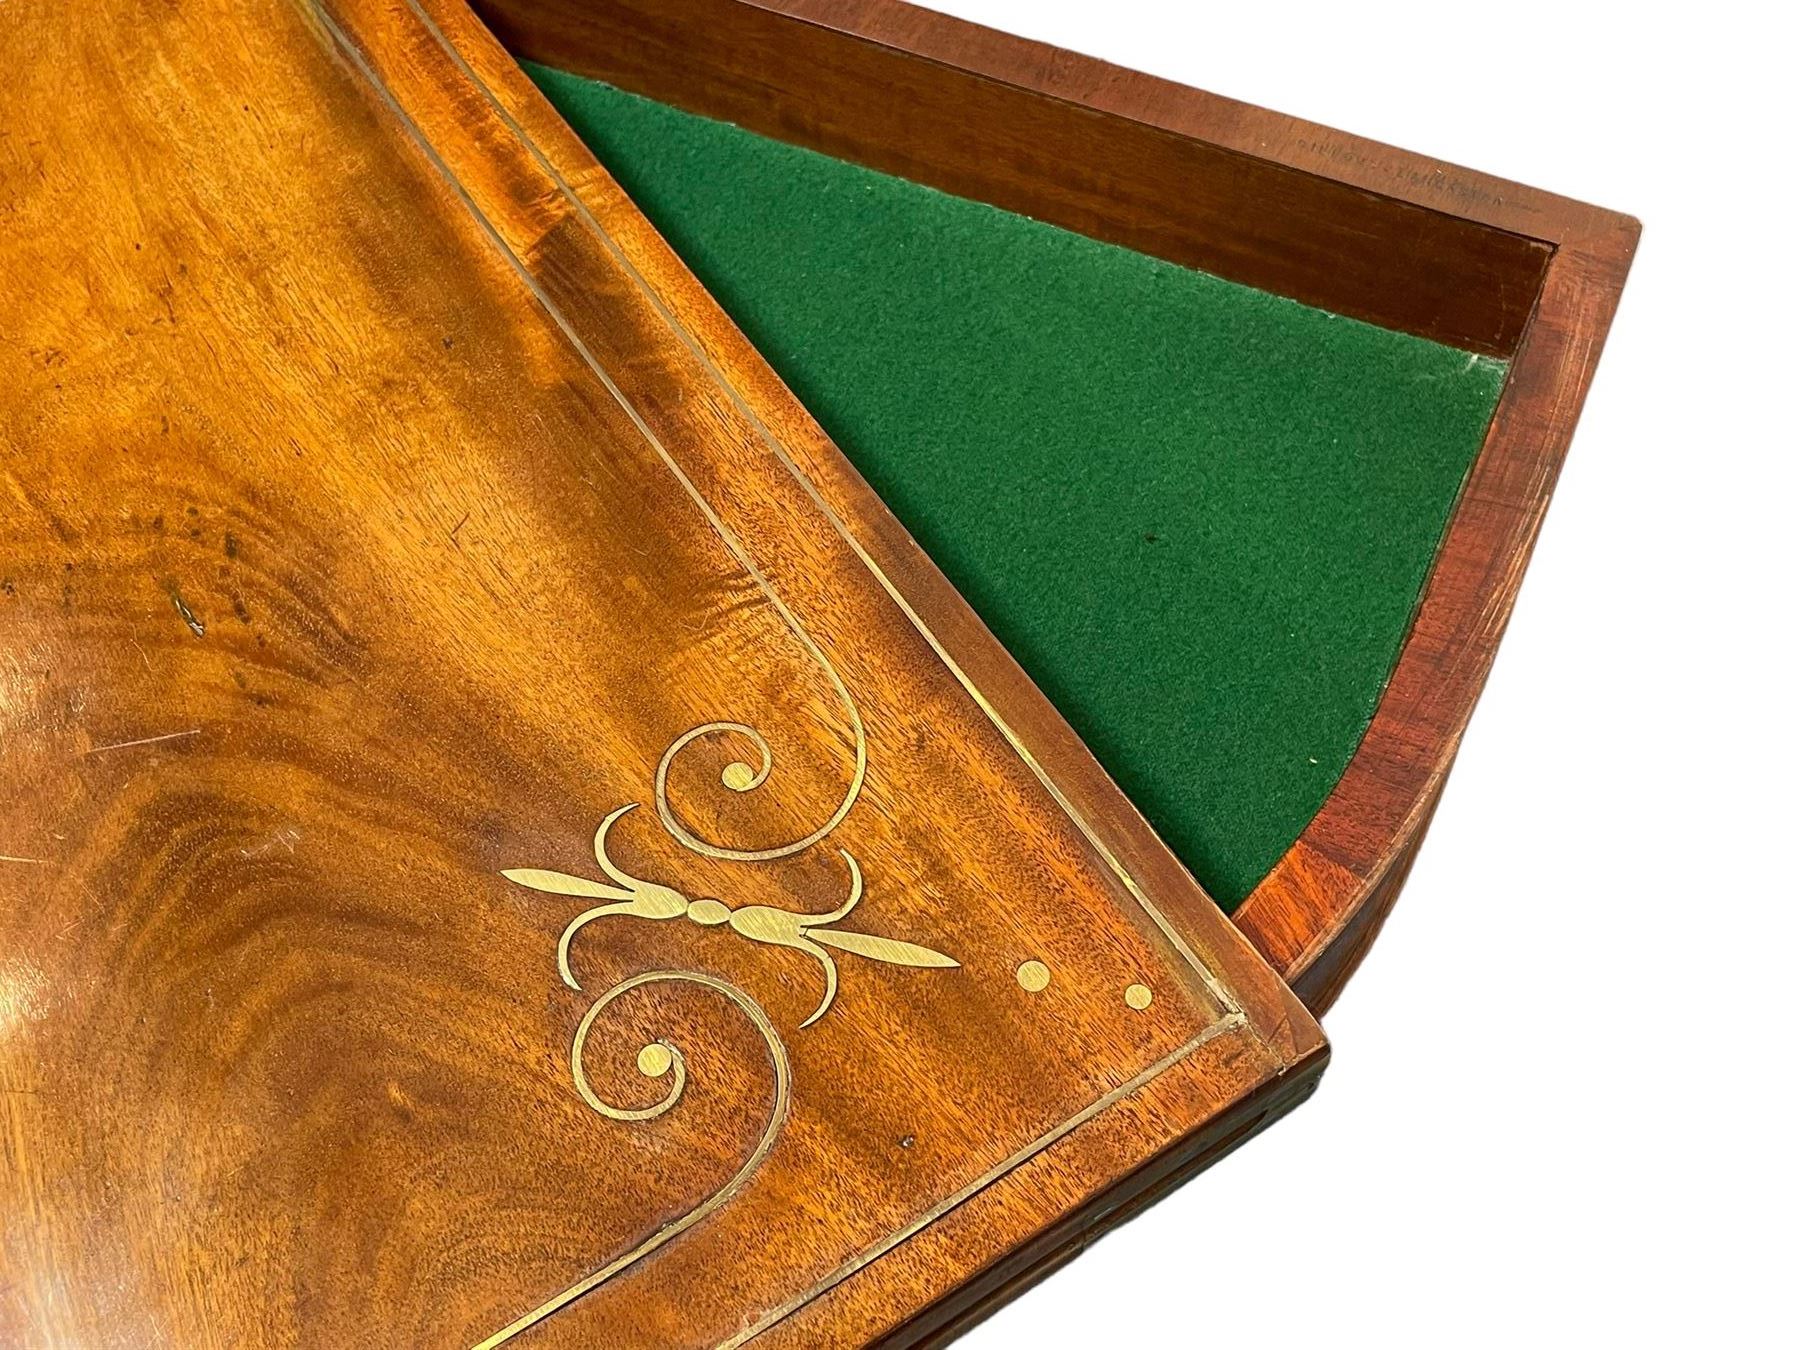 Pair Regency mahogany and brass inlaid card tables - Image 19 of 21